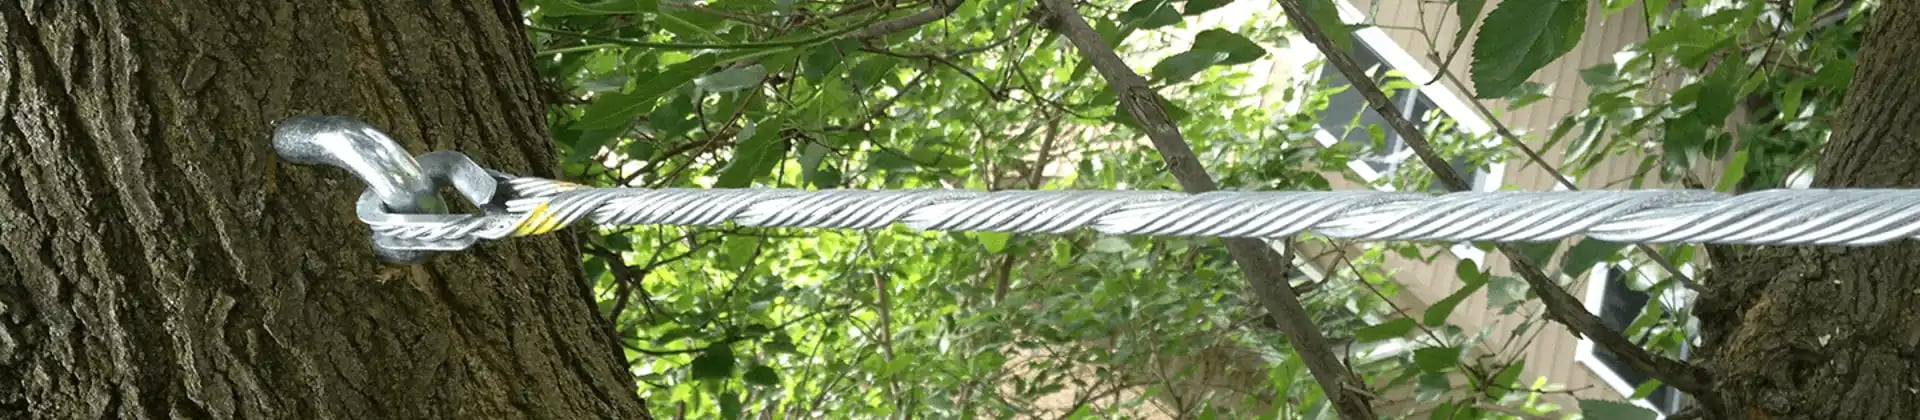 Stainless steel cable attached to a tree branch to help the tree from spreading and possible breaking